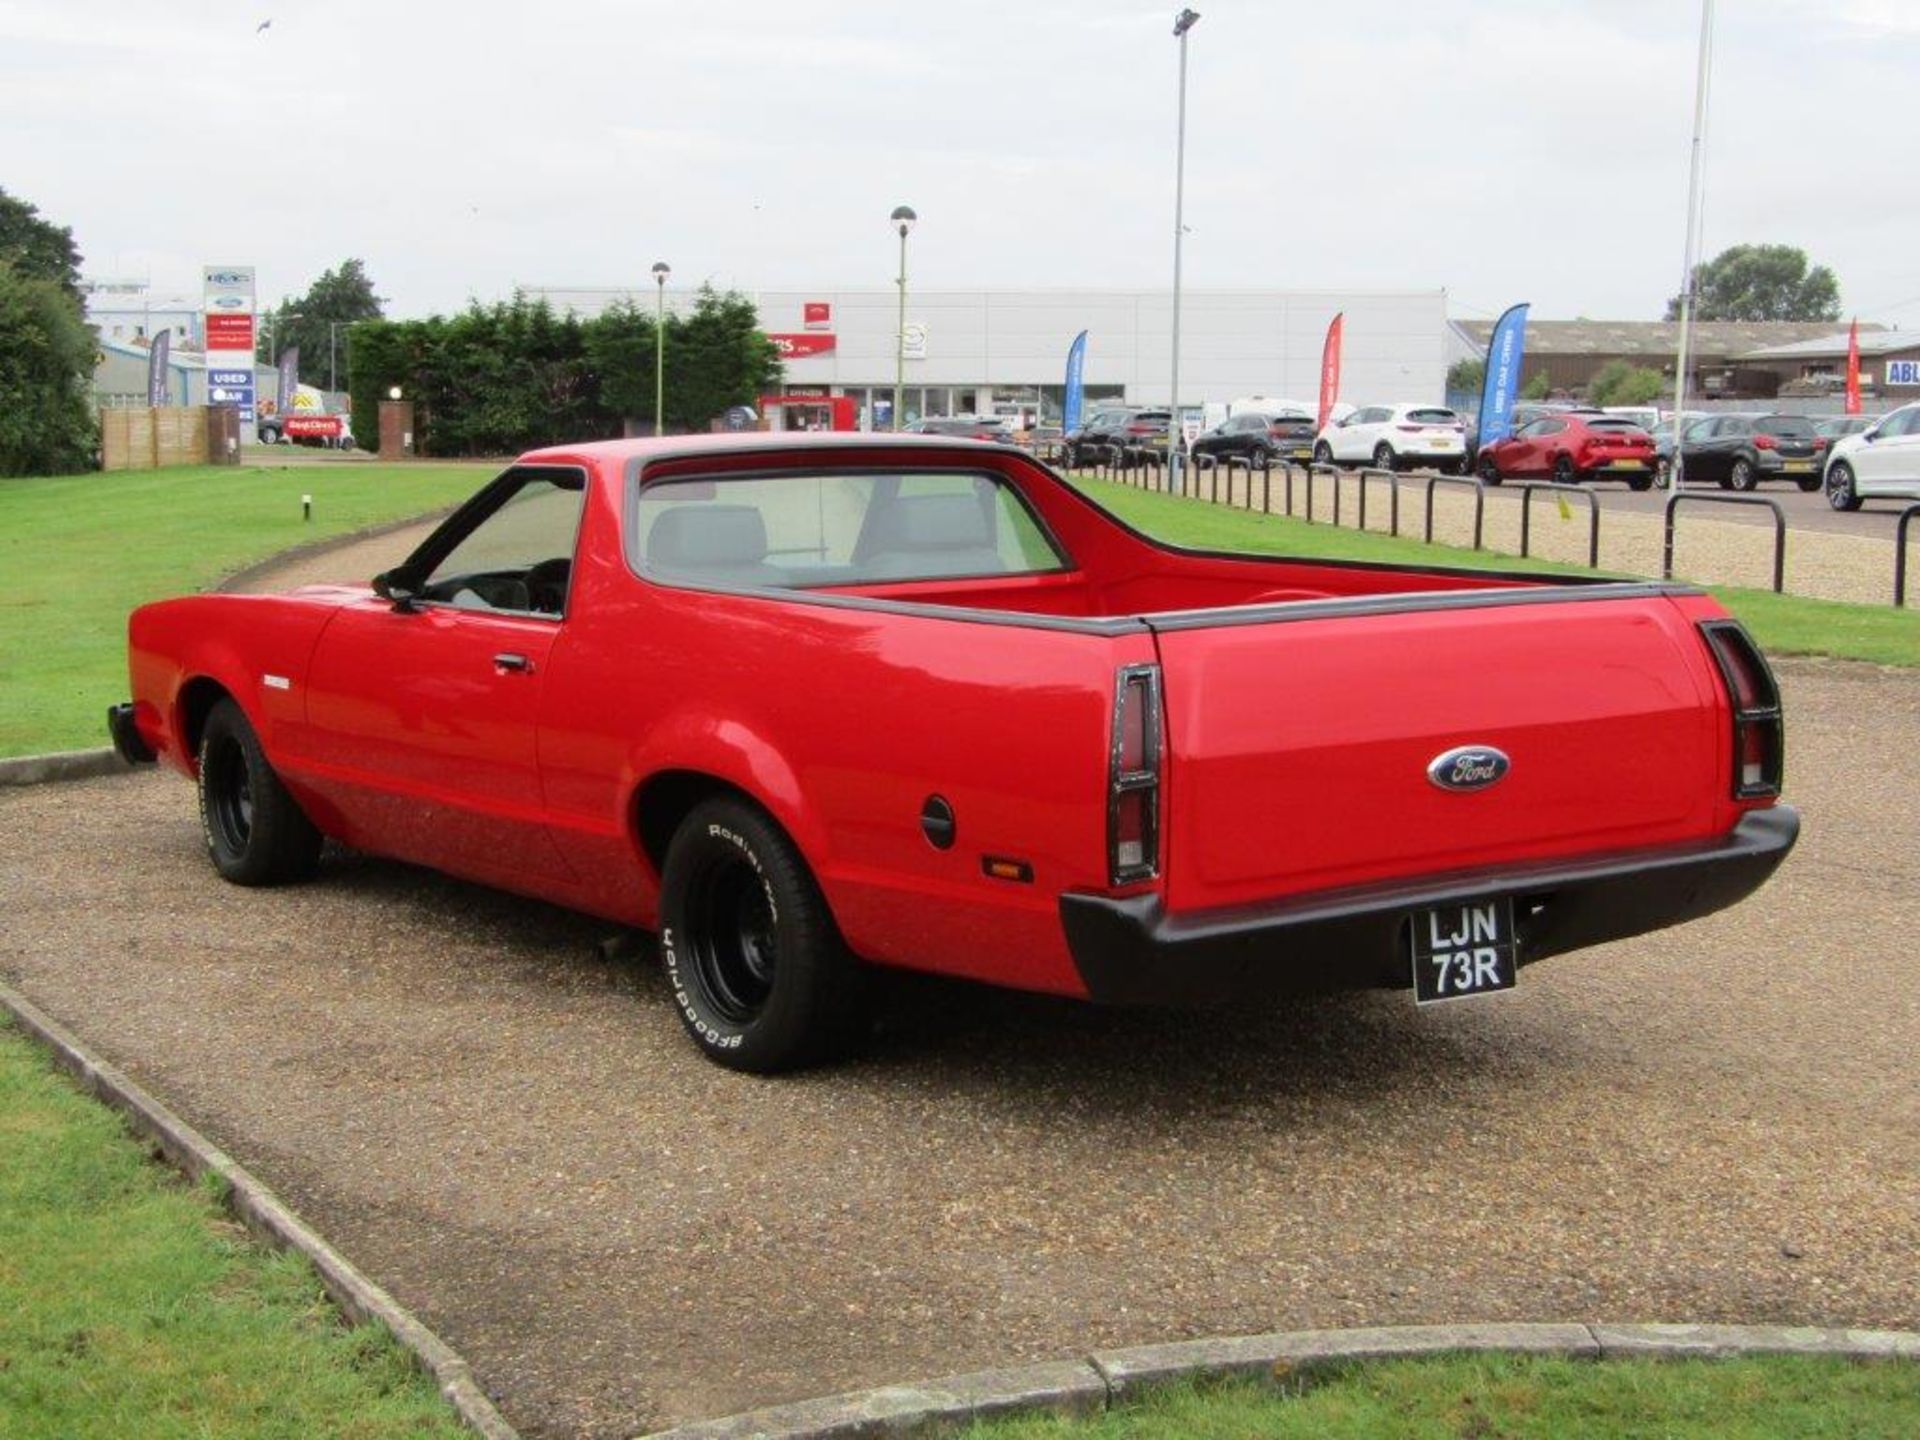 1977 Ford Ranchero 5.8 V8 Auto LHD - Image 5 of 17